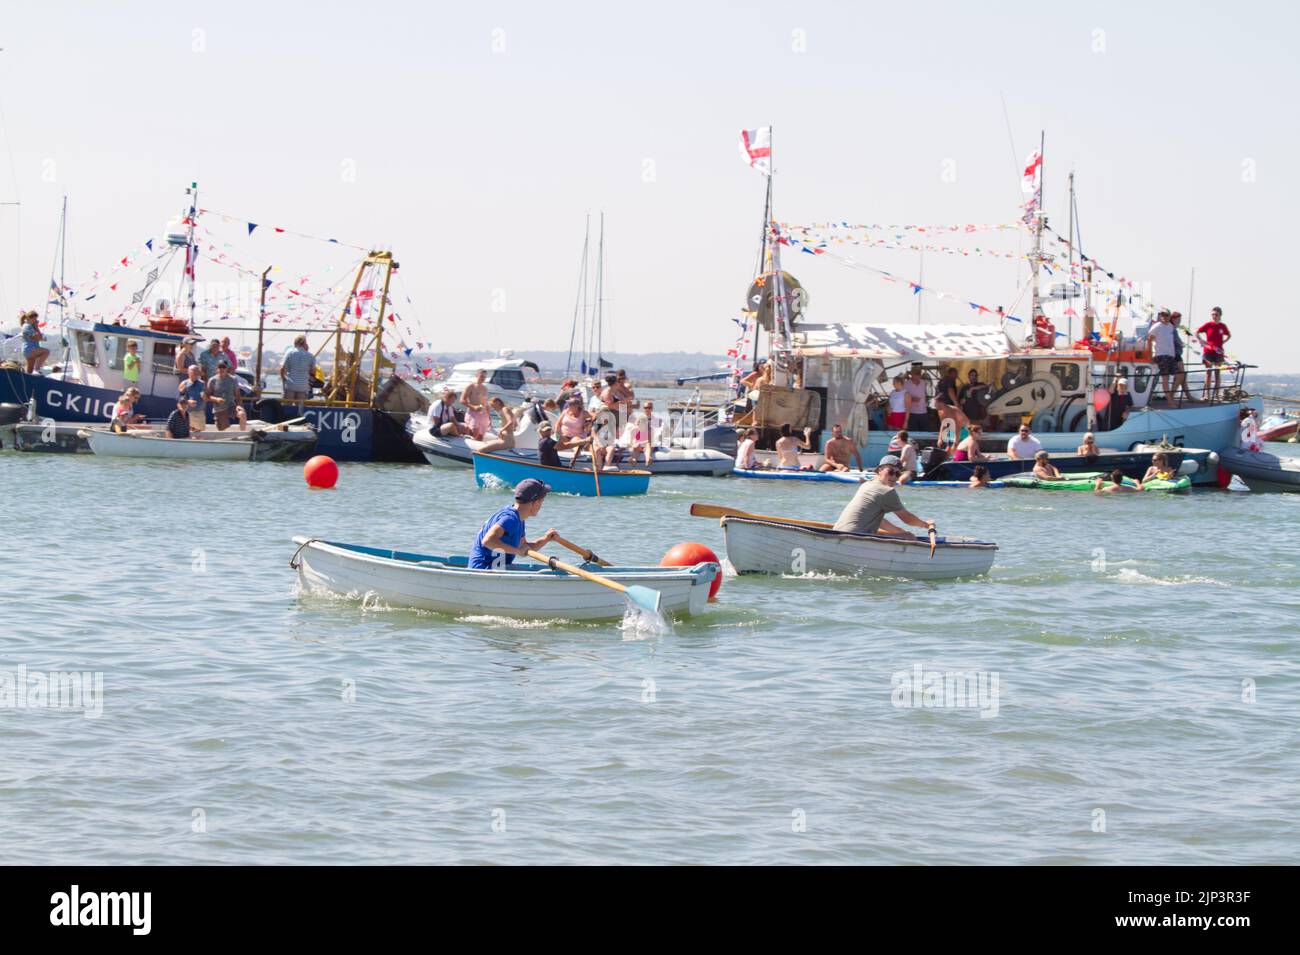 West Mersea Town Regatta on Mersea Island in Essex. One of the rowing races. Stock Photo